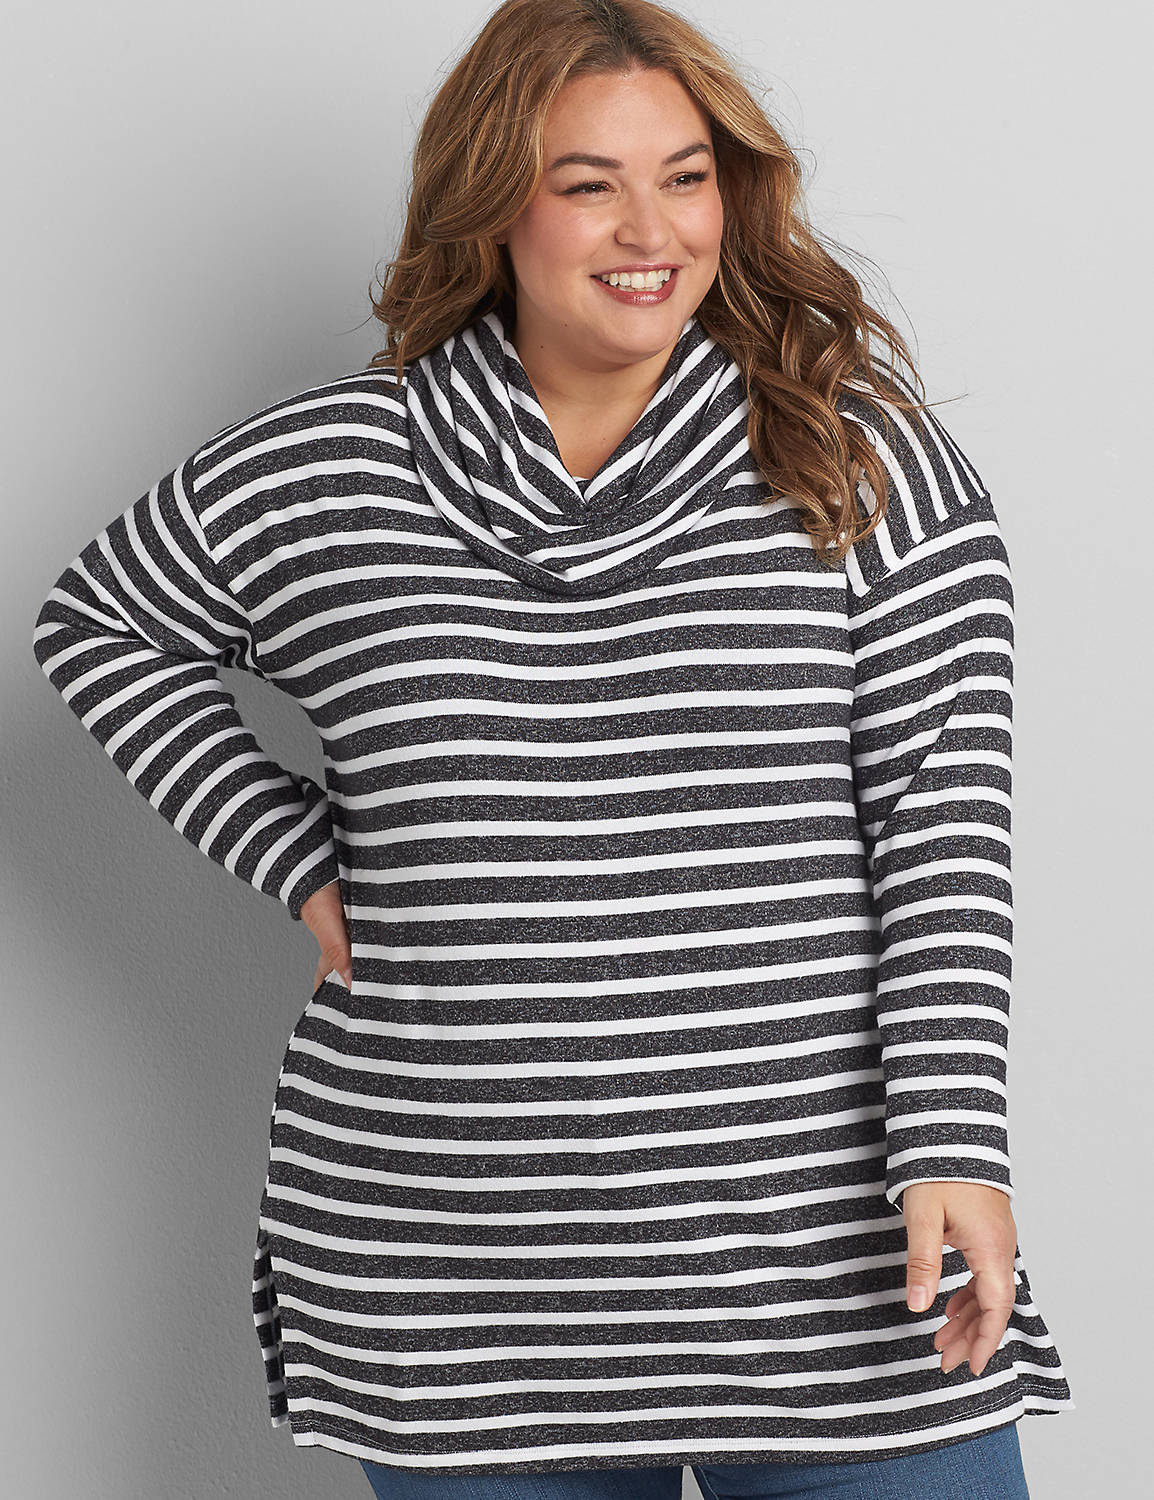 Long Sleeve Cowl Neck Texture Stripe Tunic F 1117240:LBH20314_AliviaStripe_colorway2:14/16 Product Image 1